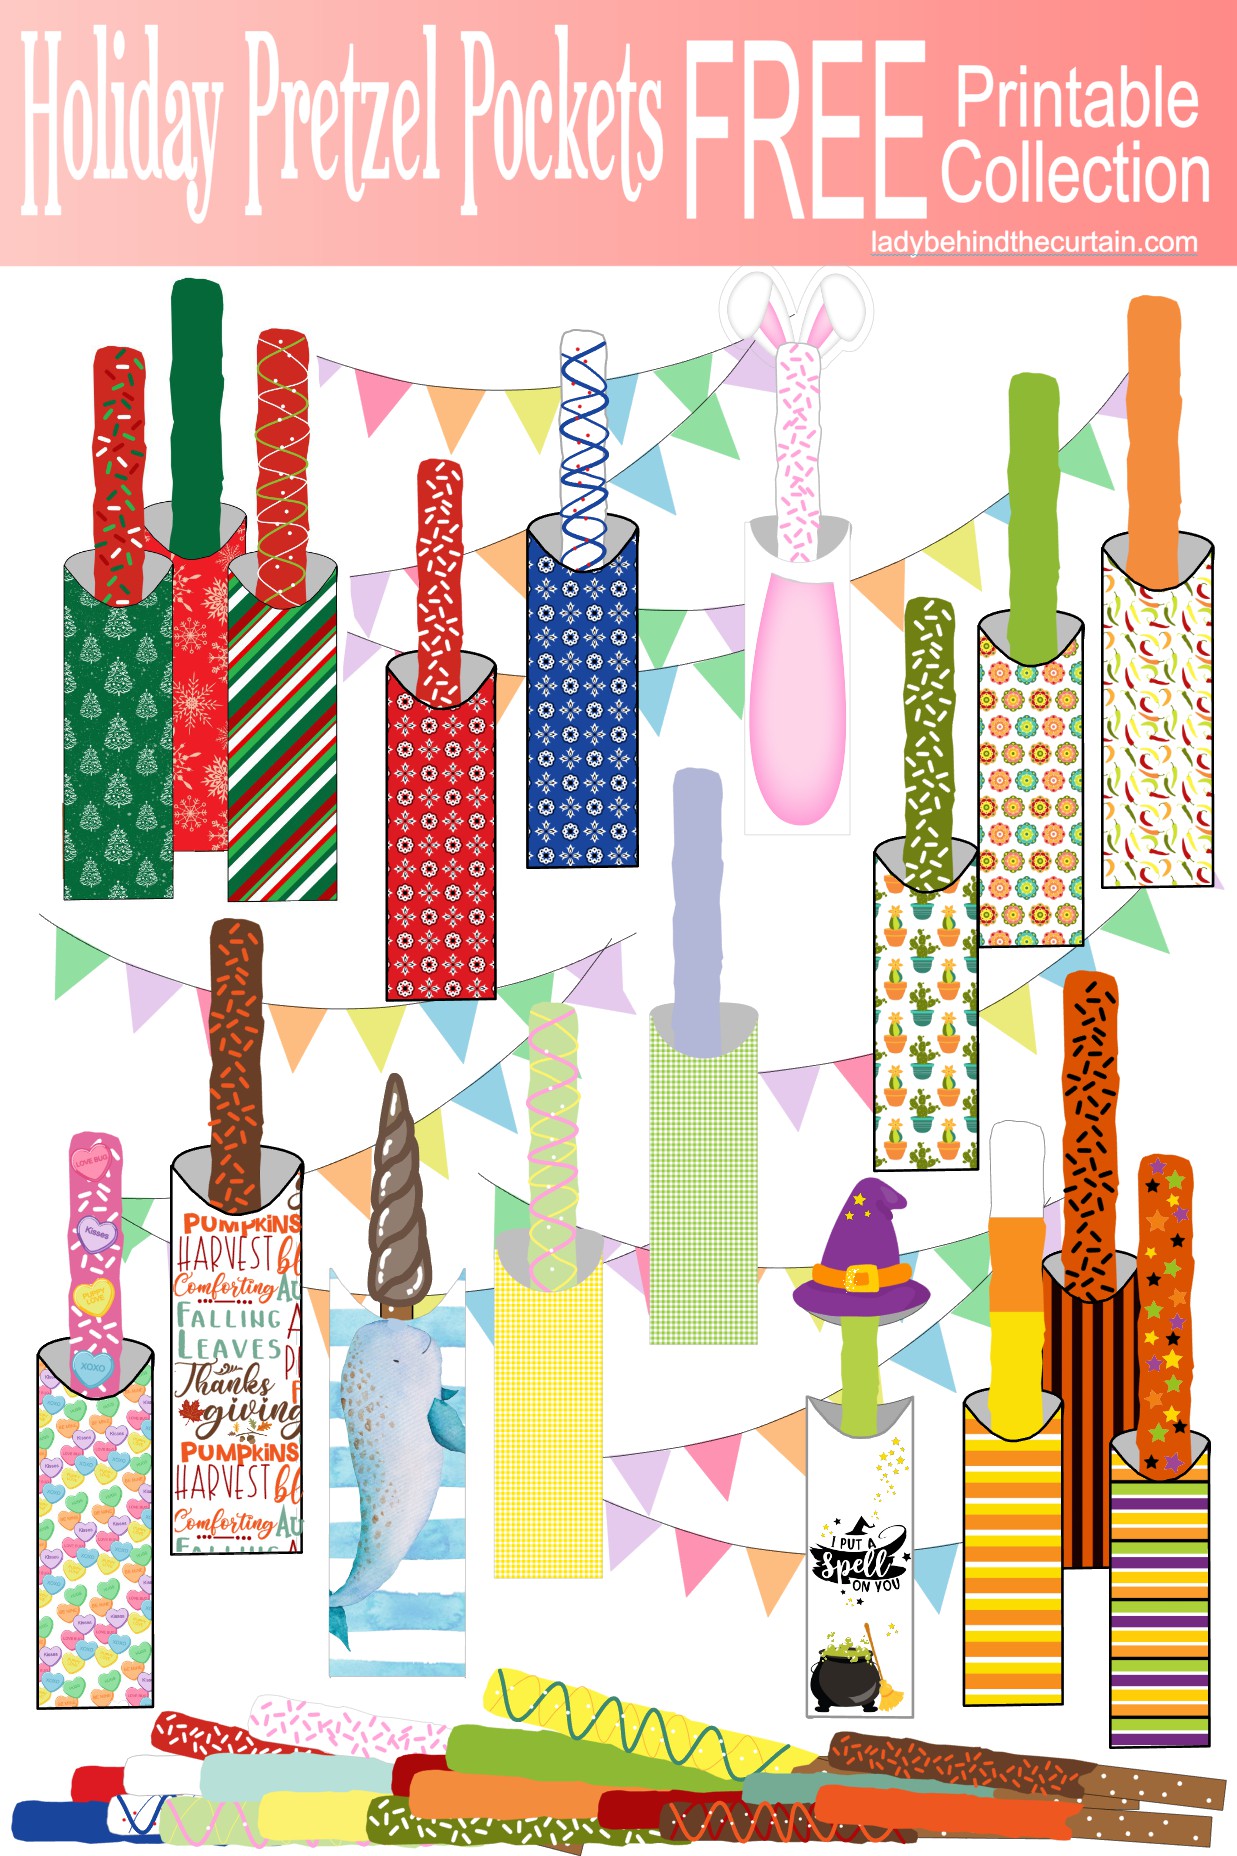 Holiday Party Pretzel Pocket FREE Printable Collection